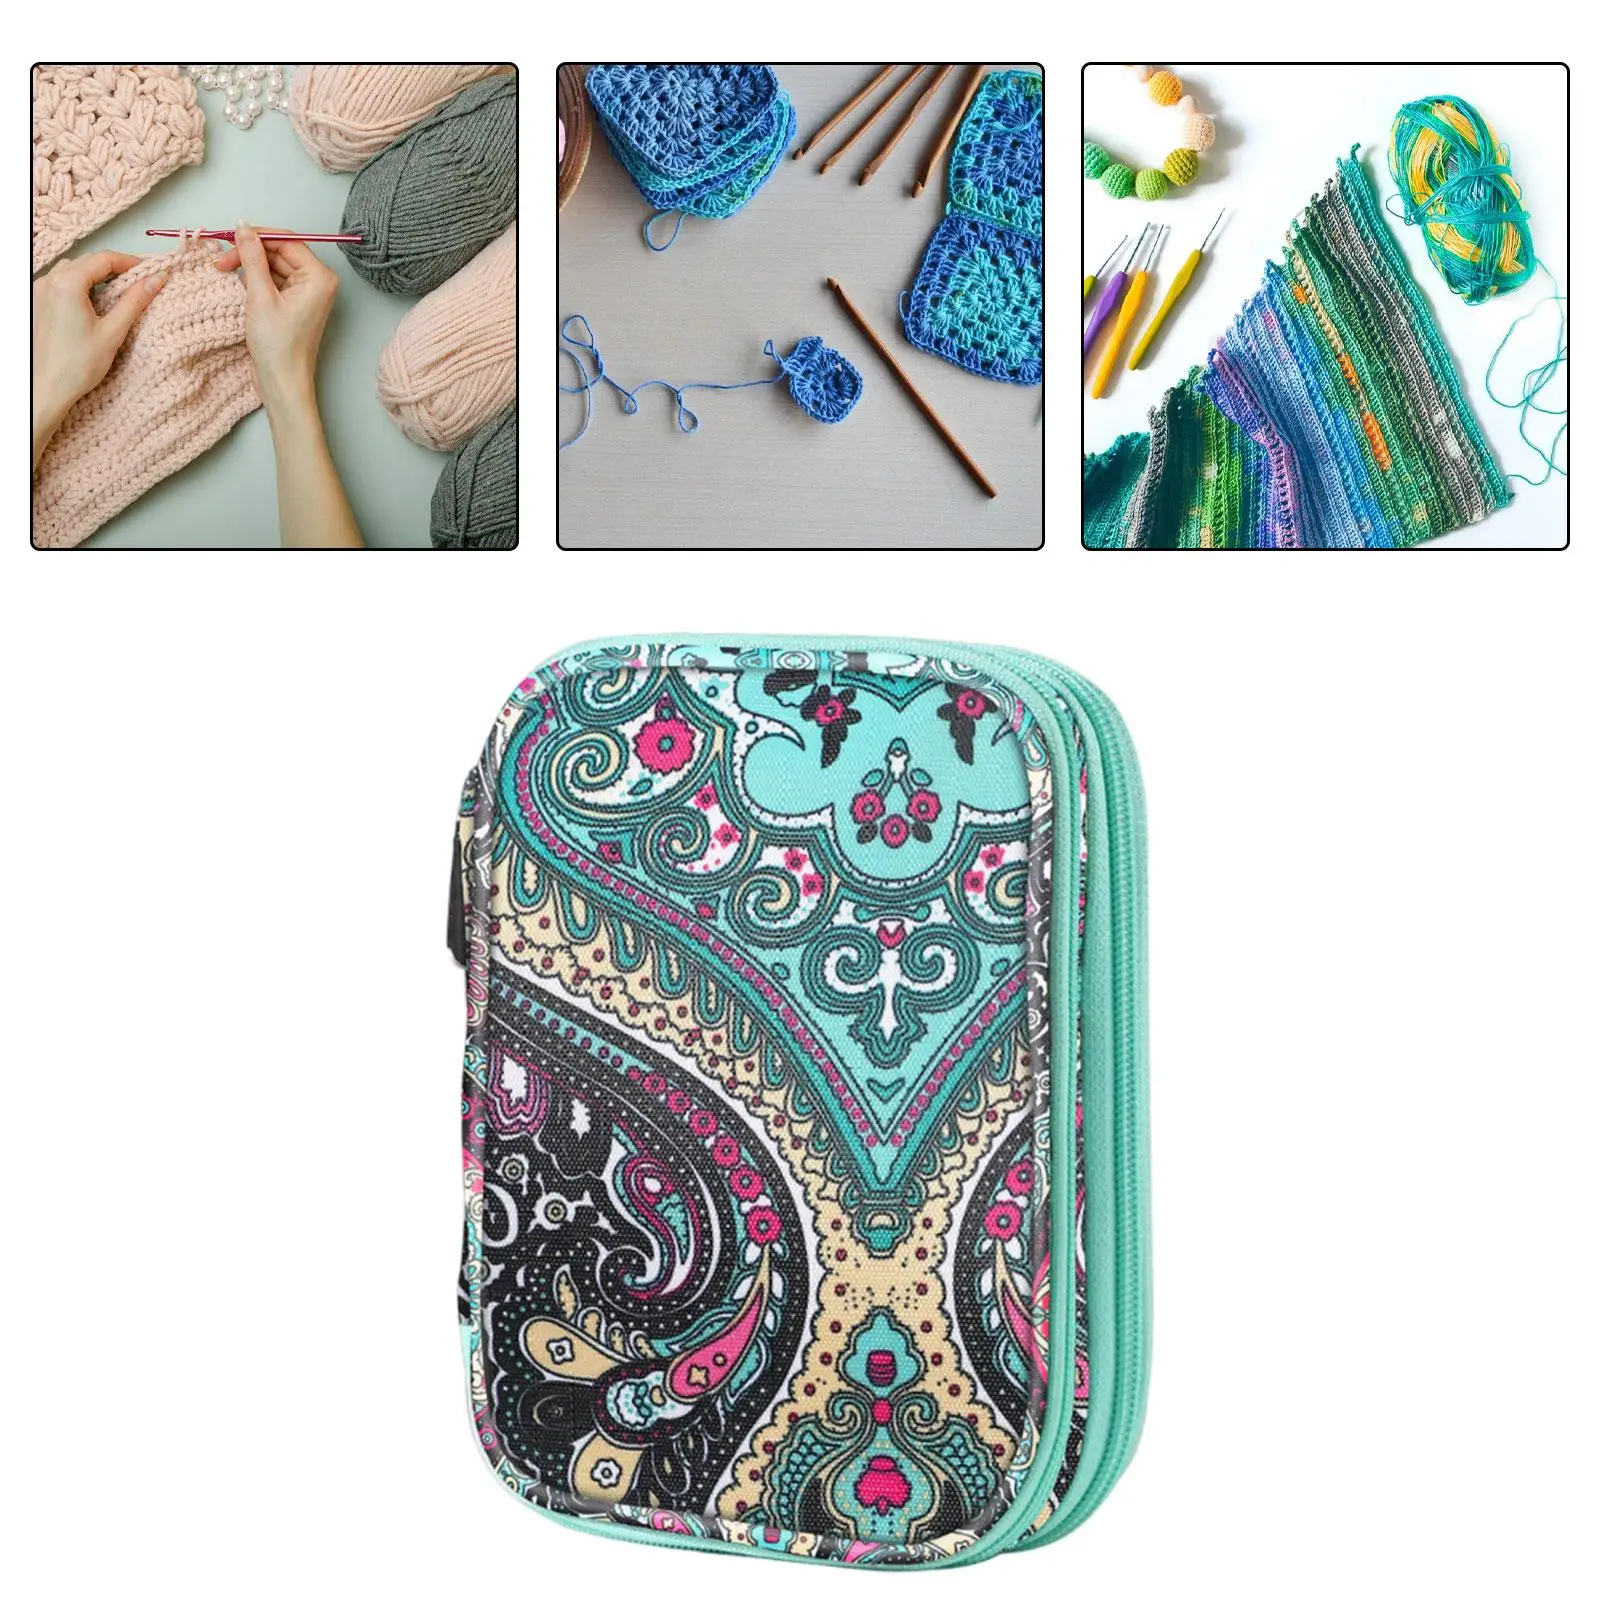 Knitting Needle Storage Bag Knitting Needle Case Floral Patternc Easy to Carry Knitting Bag Organizer Case Crochet Hook Case